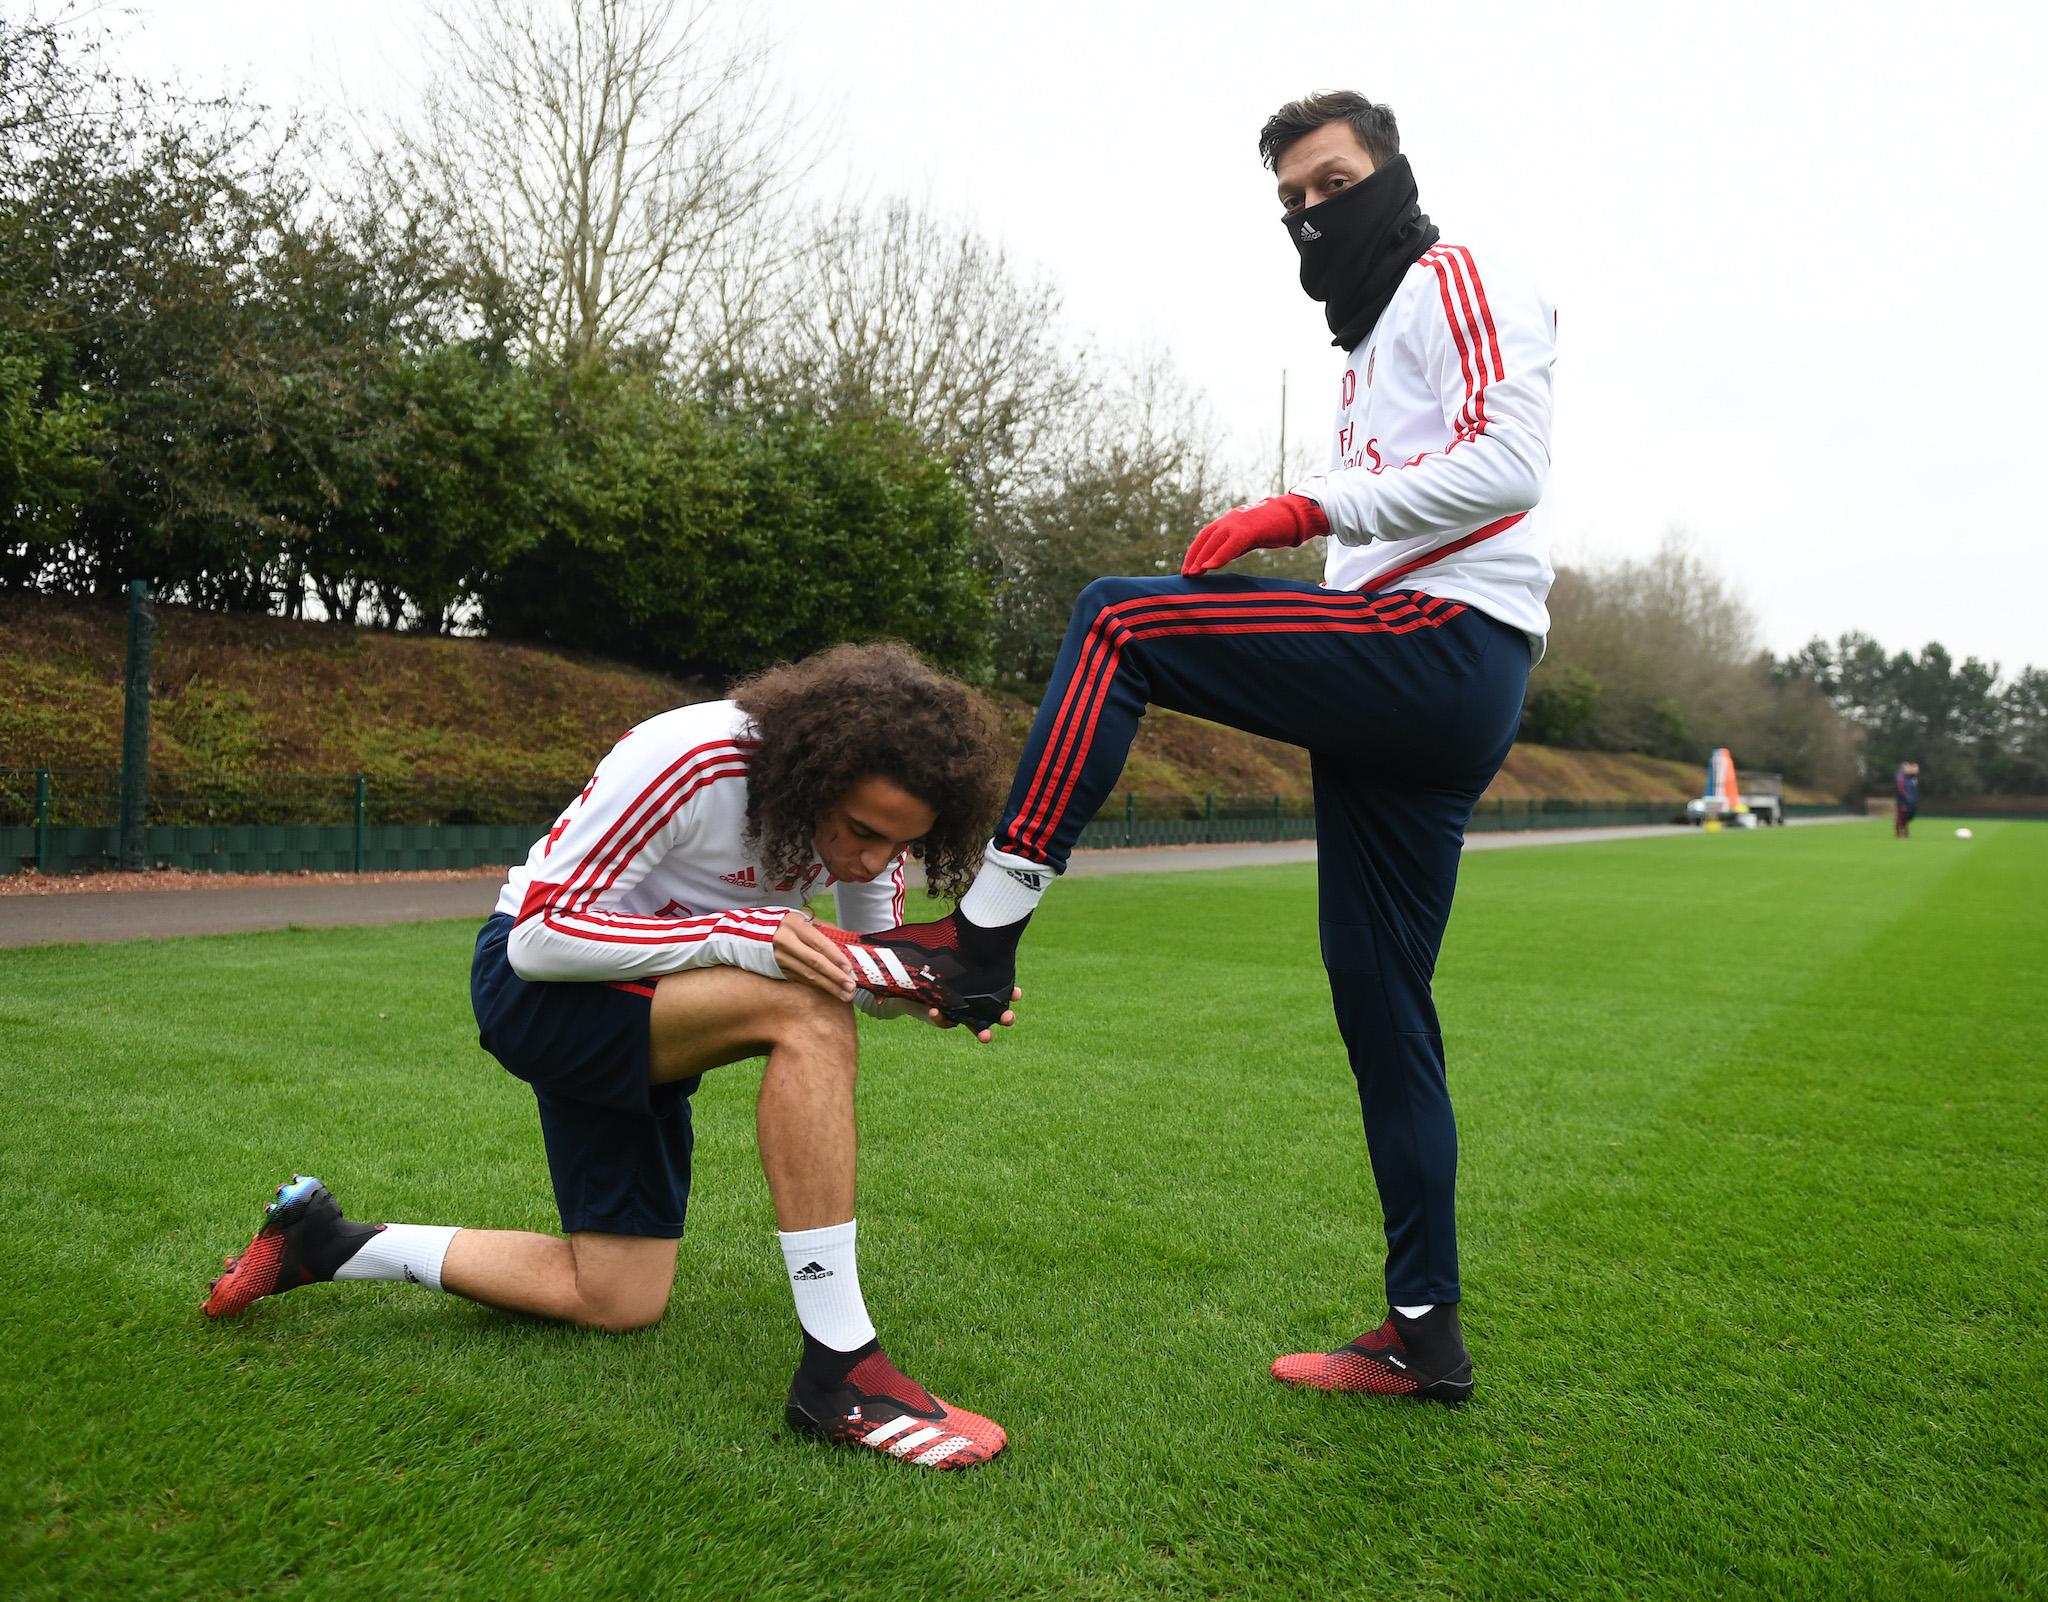 Matteo Guendouzi kisses (R) Mesut Ozil's new adidas predator boot before a training session at London Colney on January 24, 2020 in St Albans, England